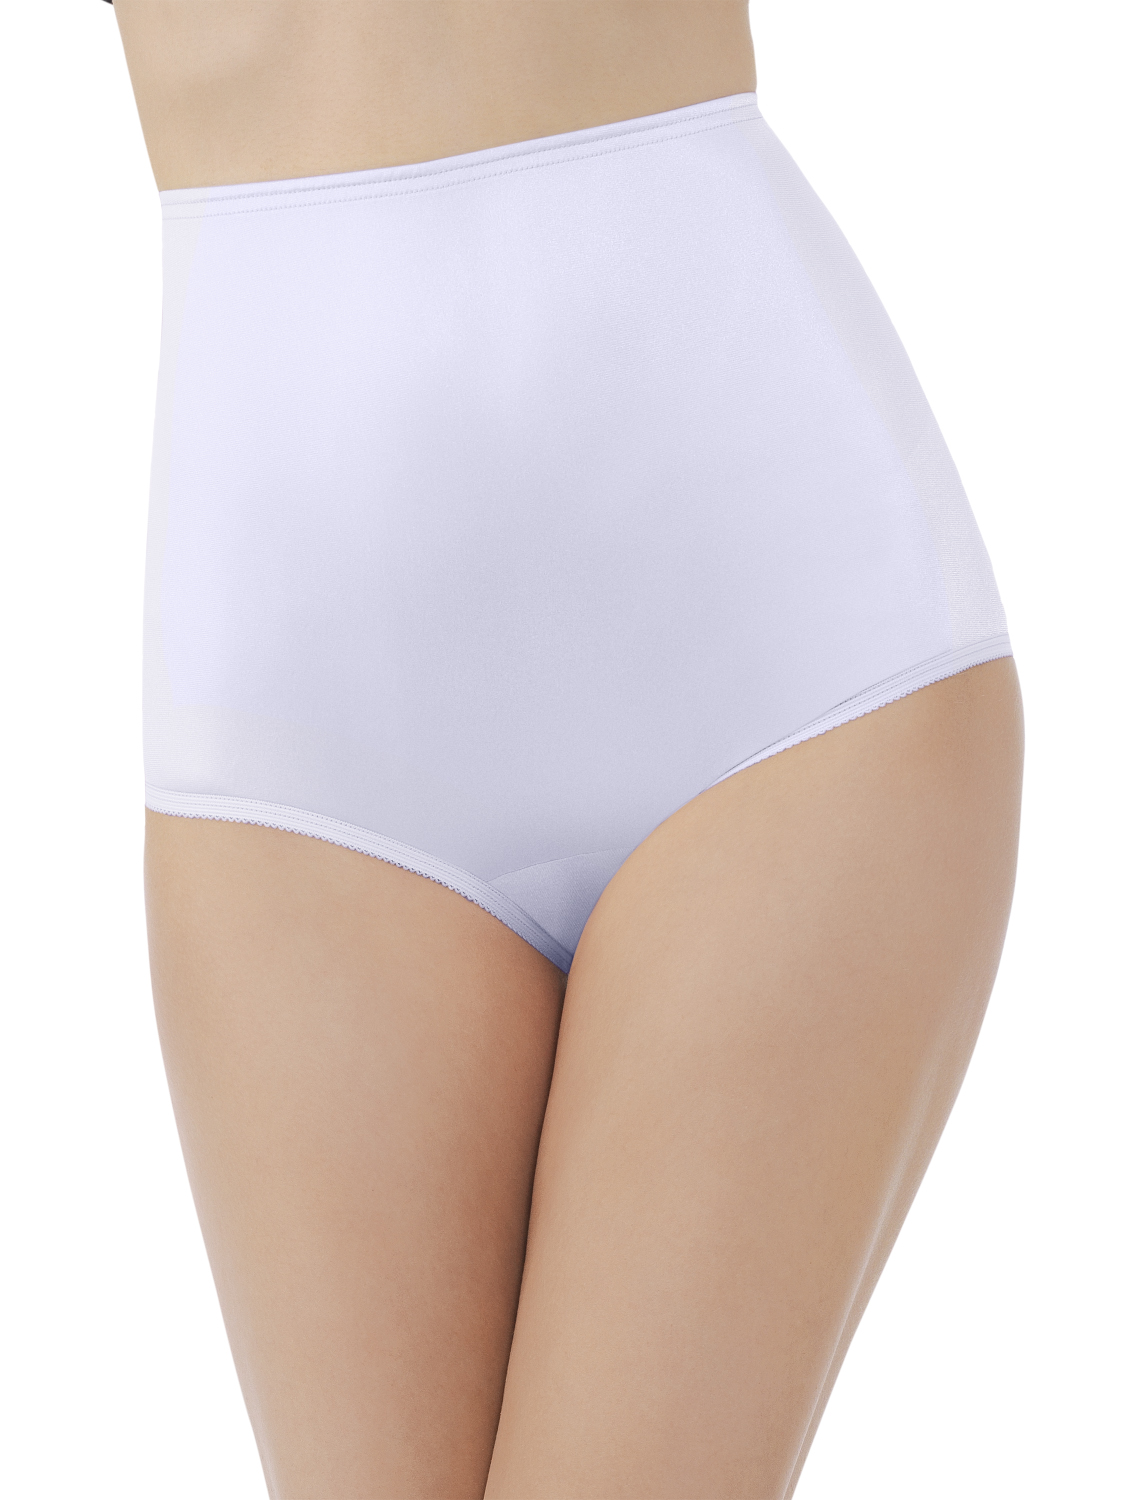 Vanity Fair Brief Style Panties 15812 White Perfectly Yours RAVISSANT 10  3xl for sale online